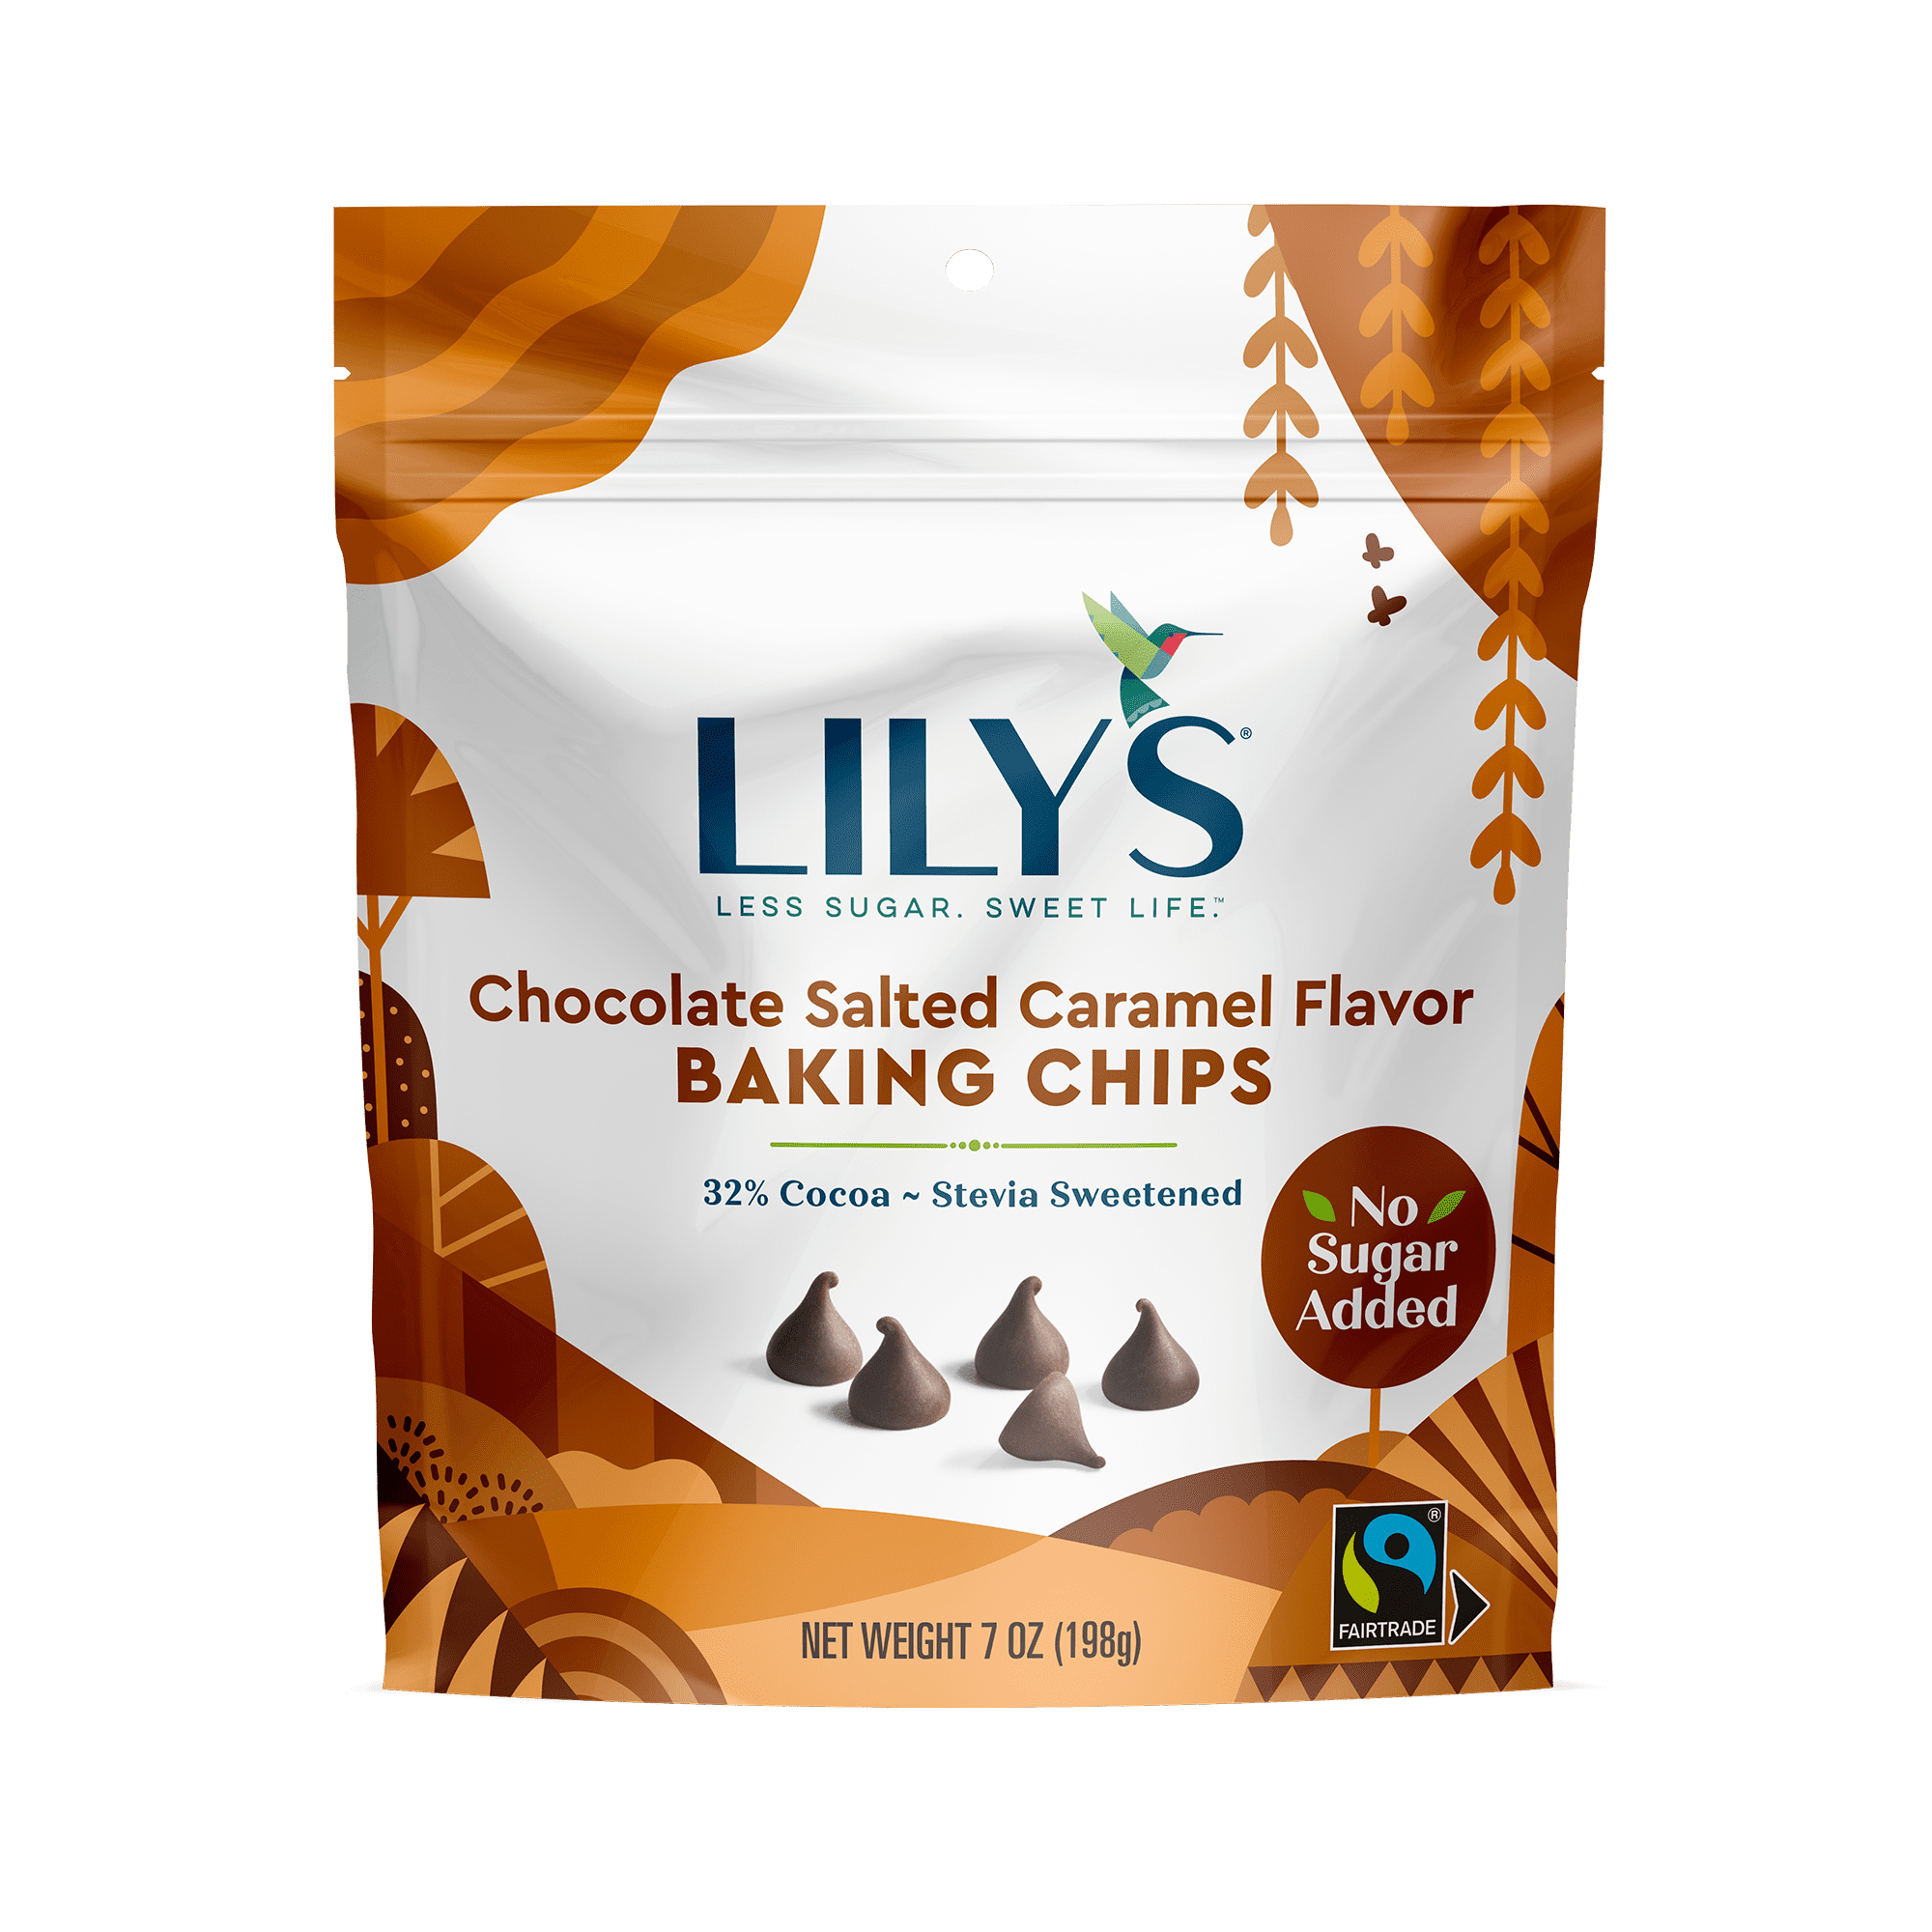 Lily's Chocolate Salted Caramel Flavor Baking Chips, 7 oz